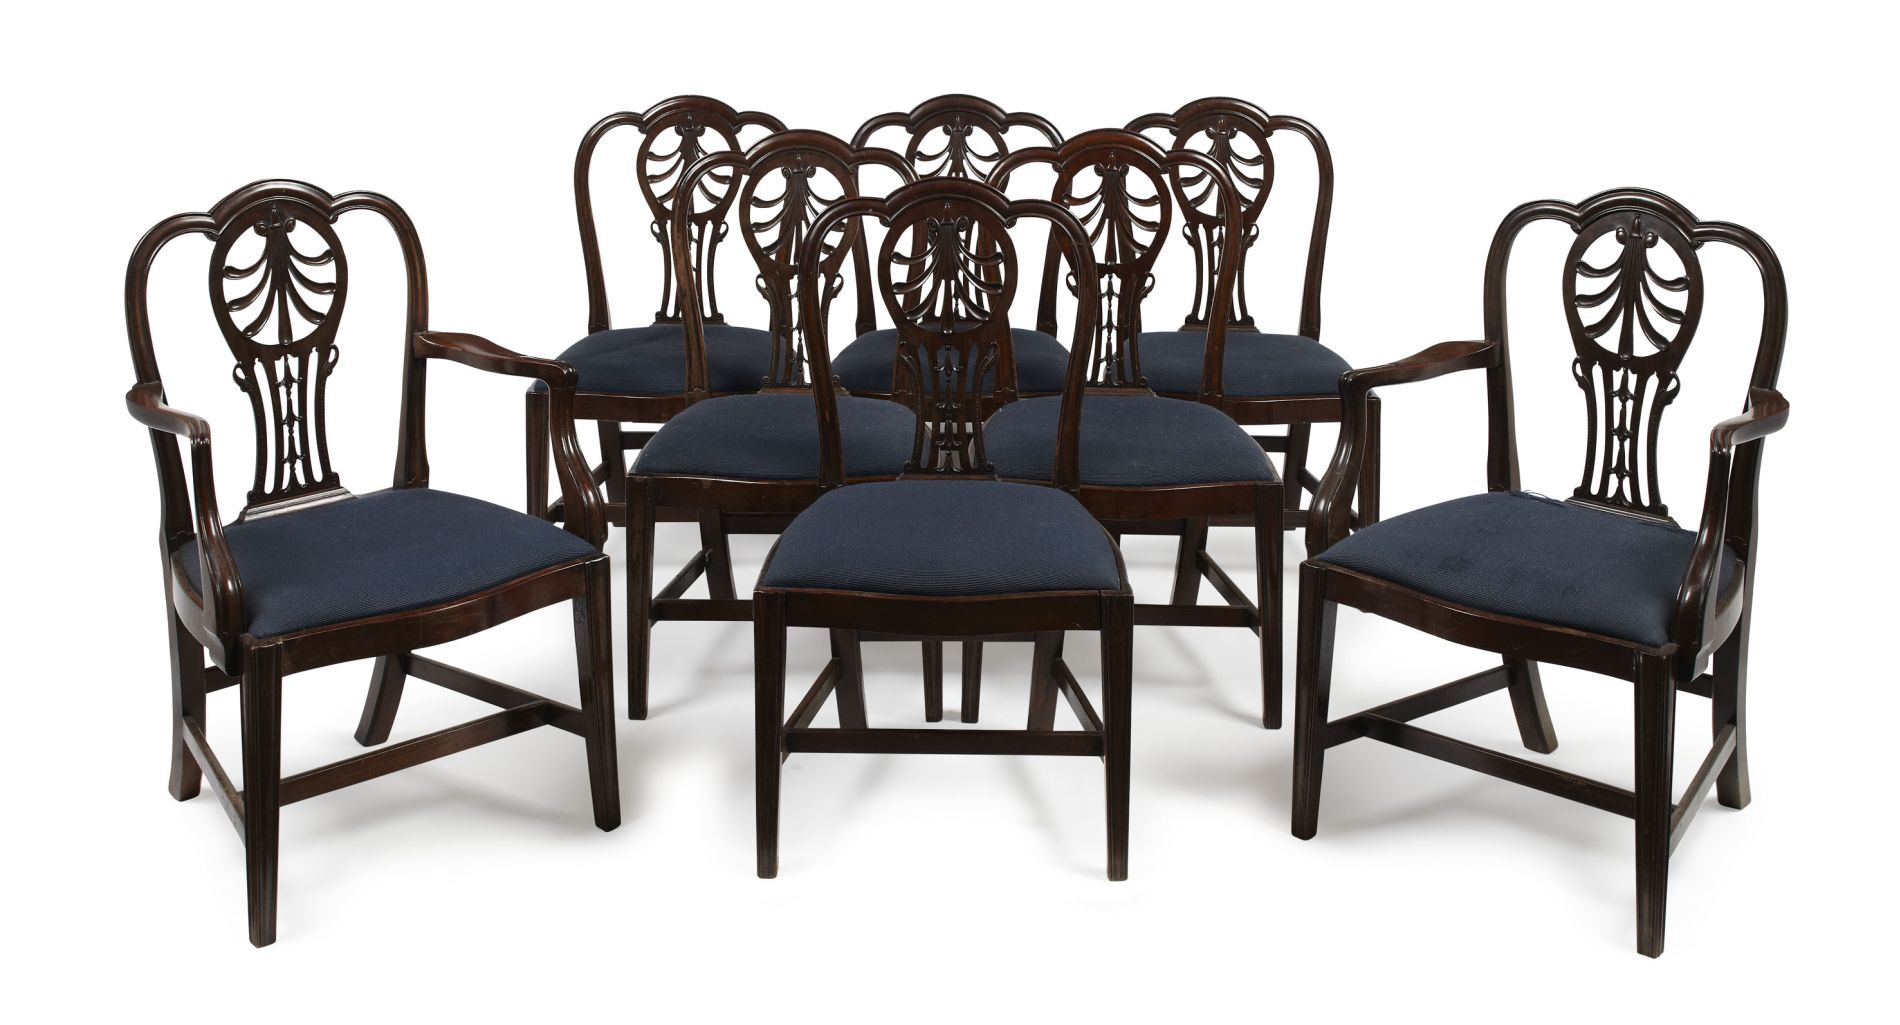 SET OF EIGHT GEORGE III STYLE MAHOGANY DINING CHAIRS 19TH CENTURY comprising six side chairs and two